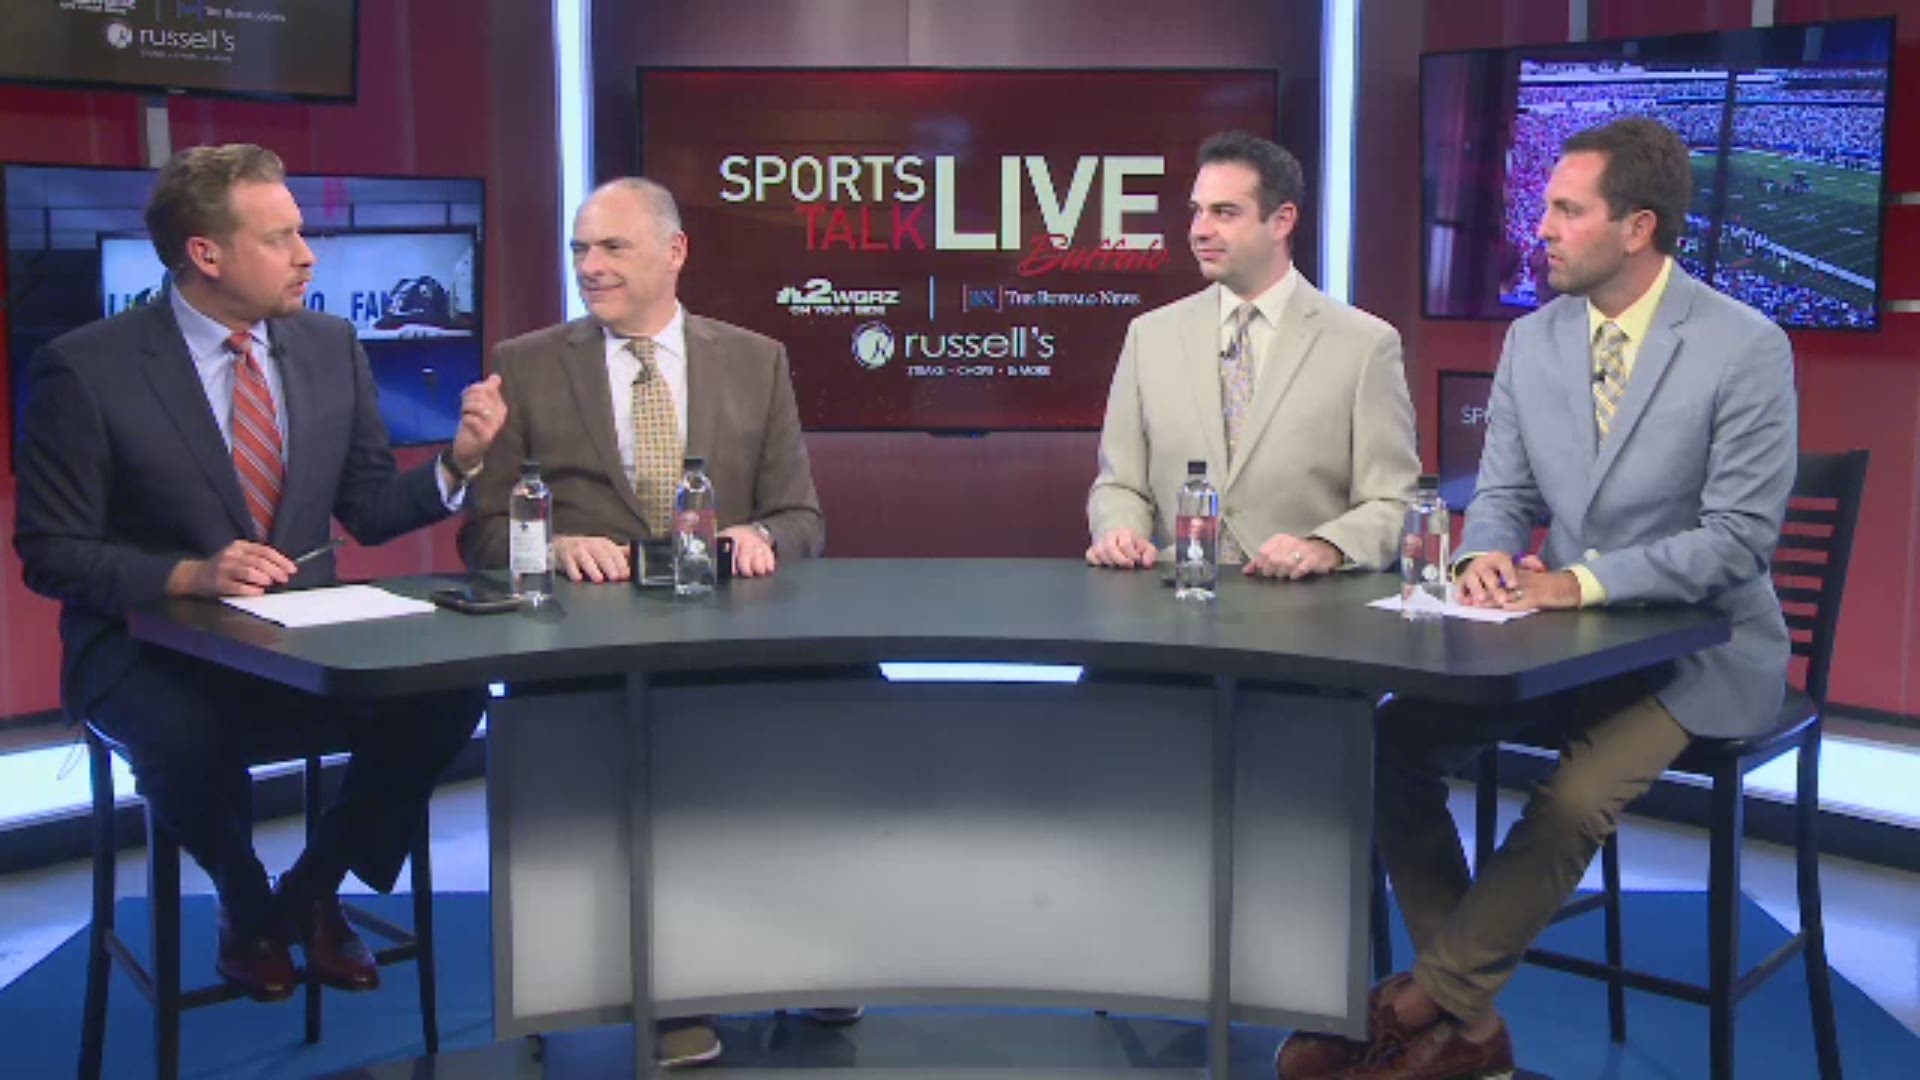 The Bills are now 5-1 on the season after Sunday's win over Miami. The Sports Talk Live Buffalo crew shares their thoughts on the Bills latest win.